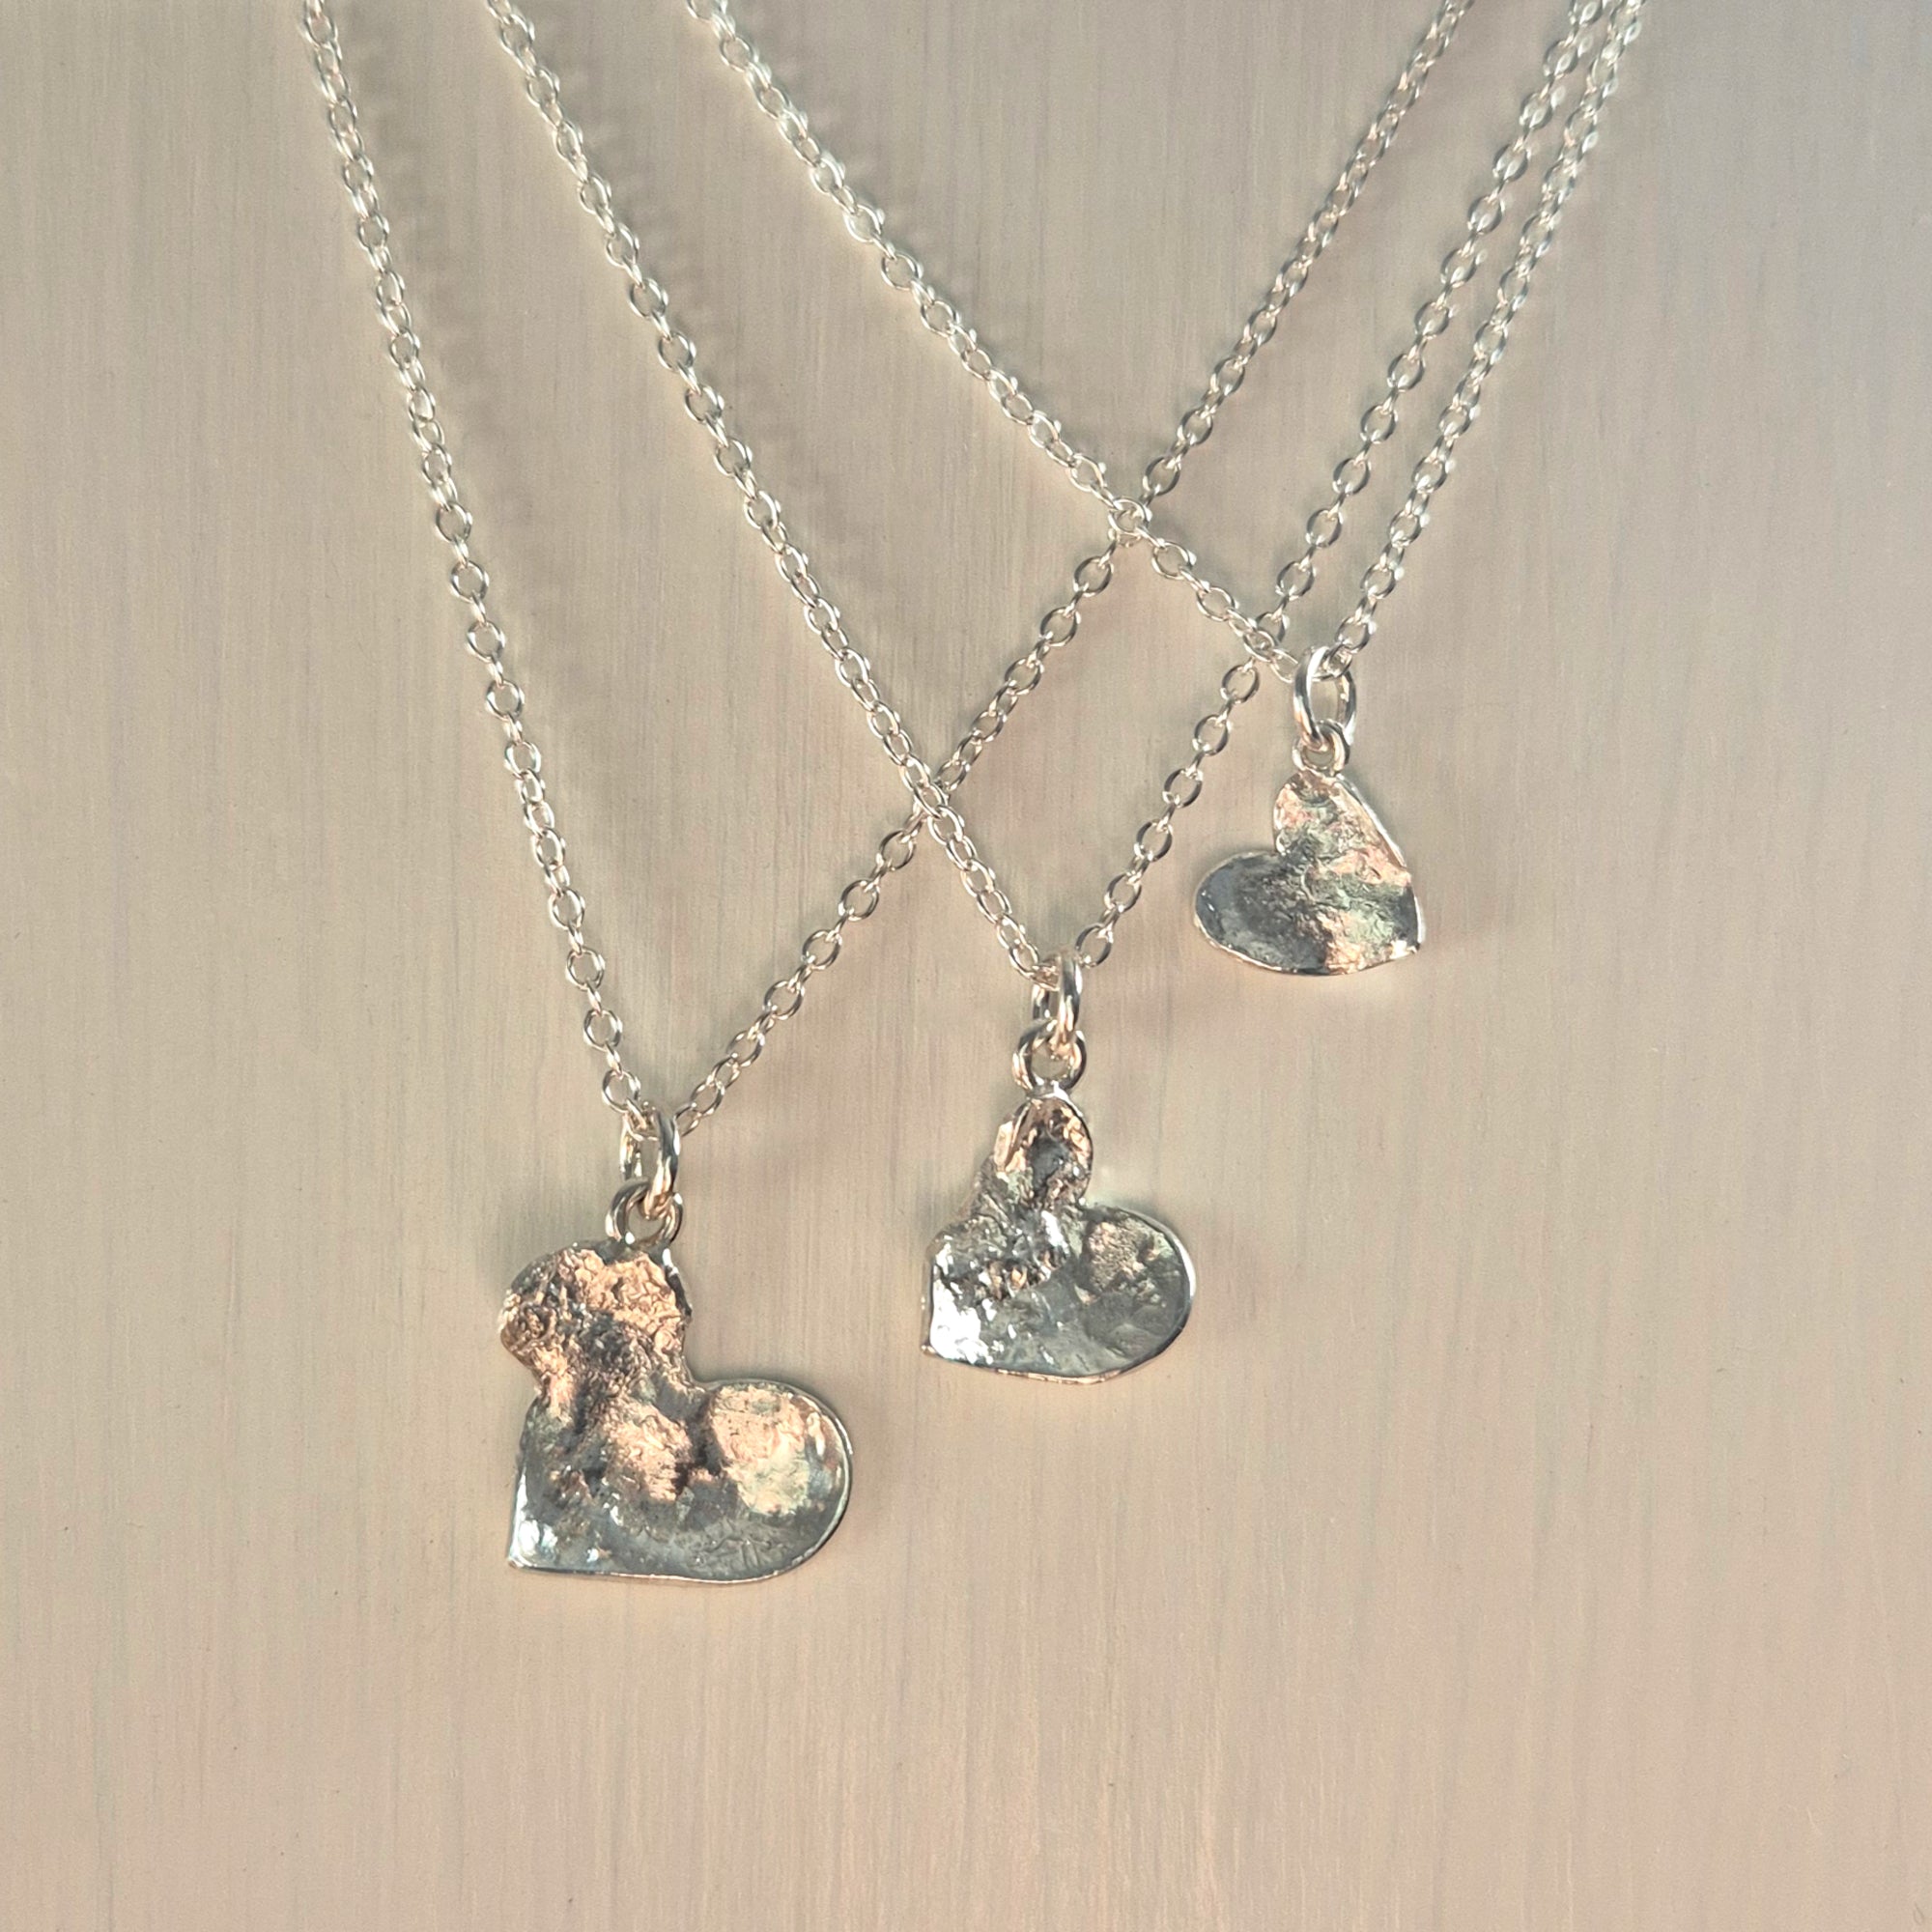 Melted Silver Heart Pendants